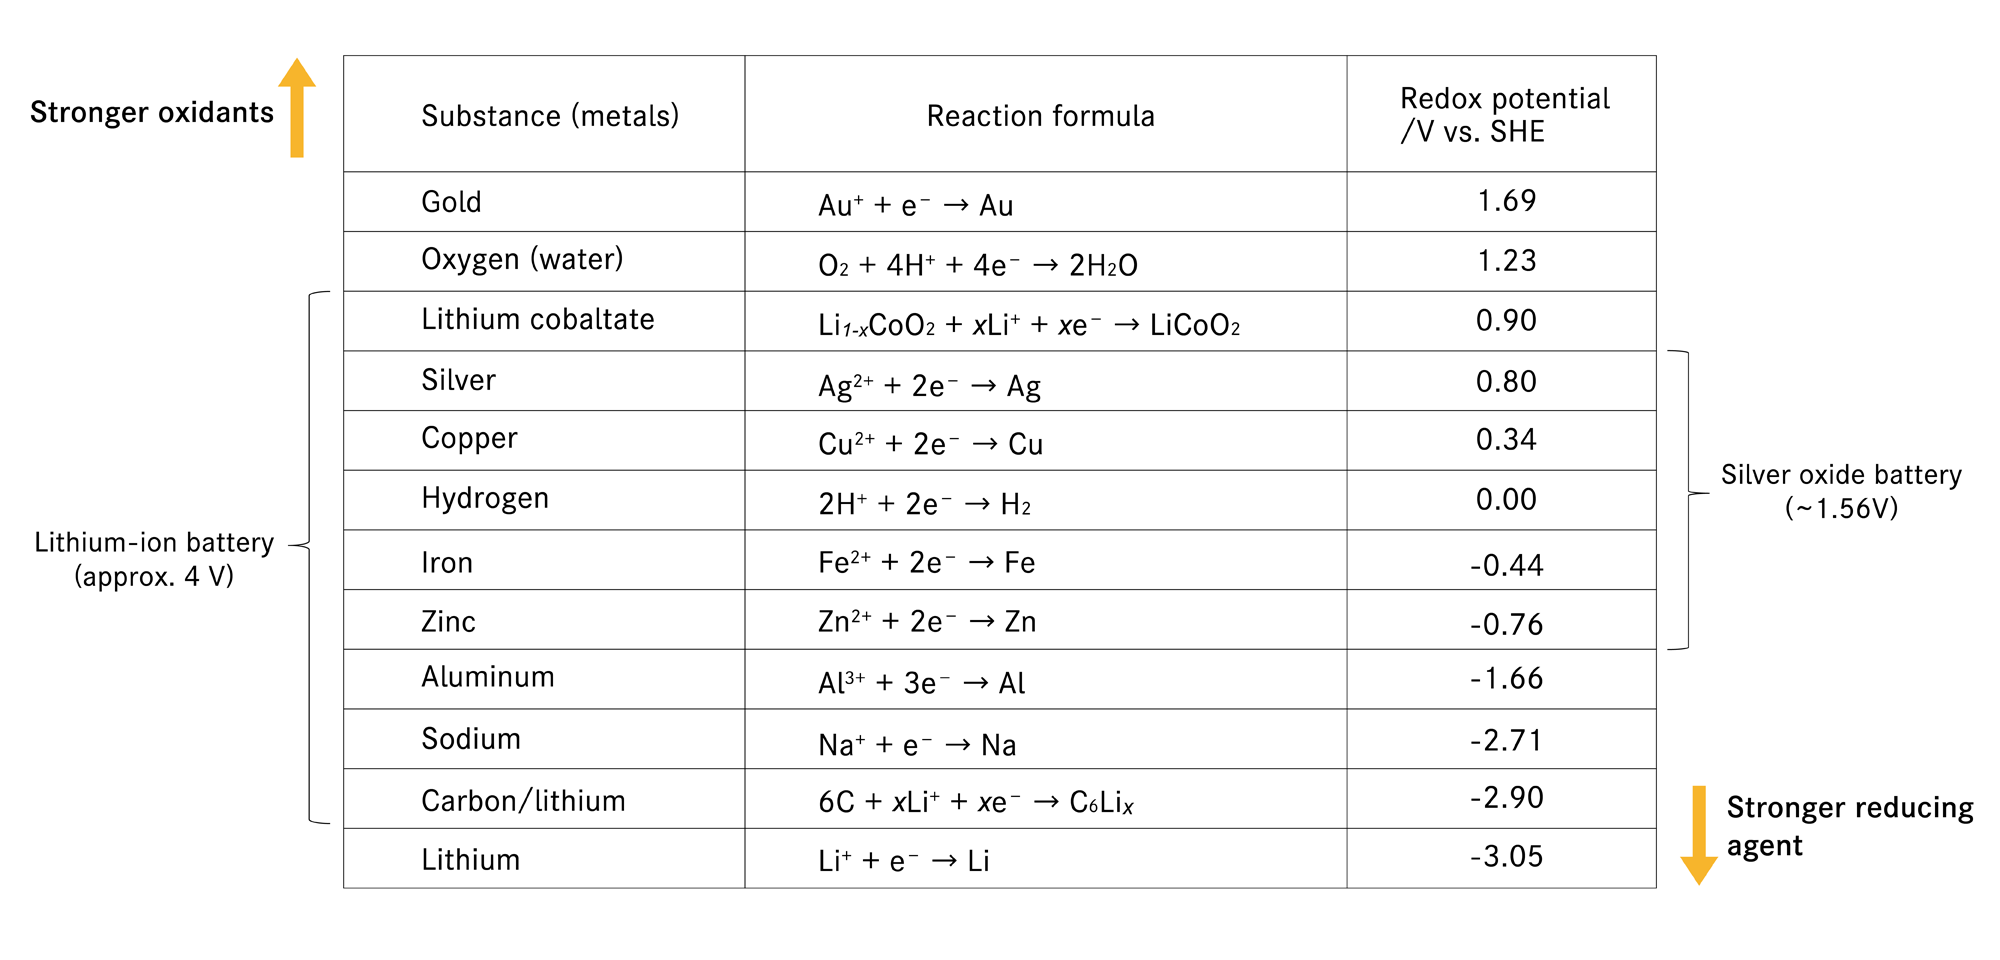 Redox potential of the main active materials